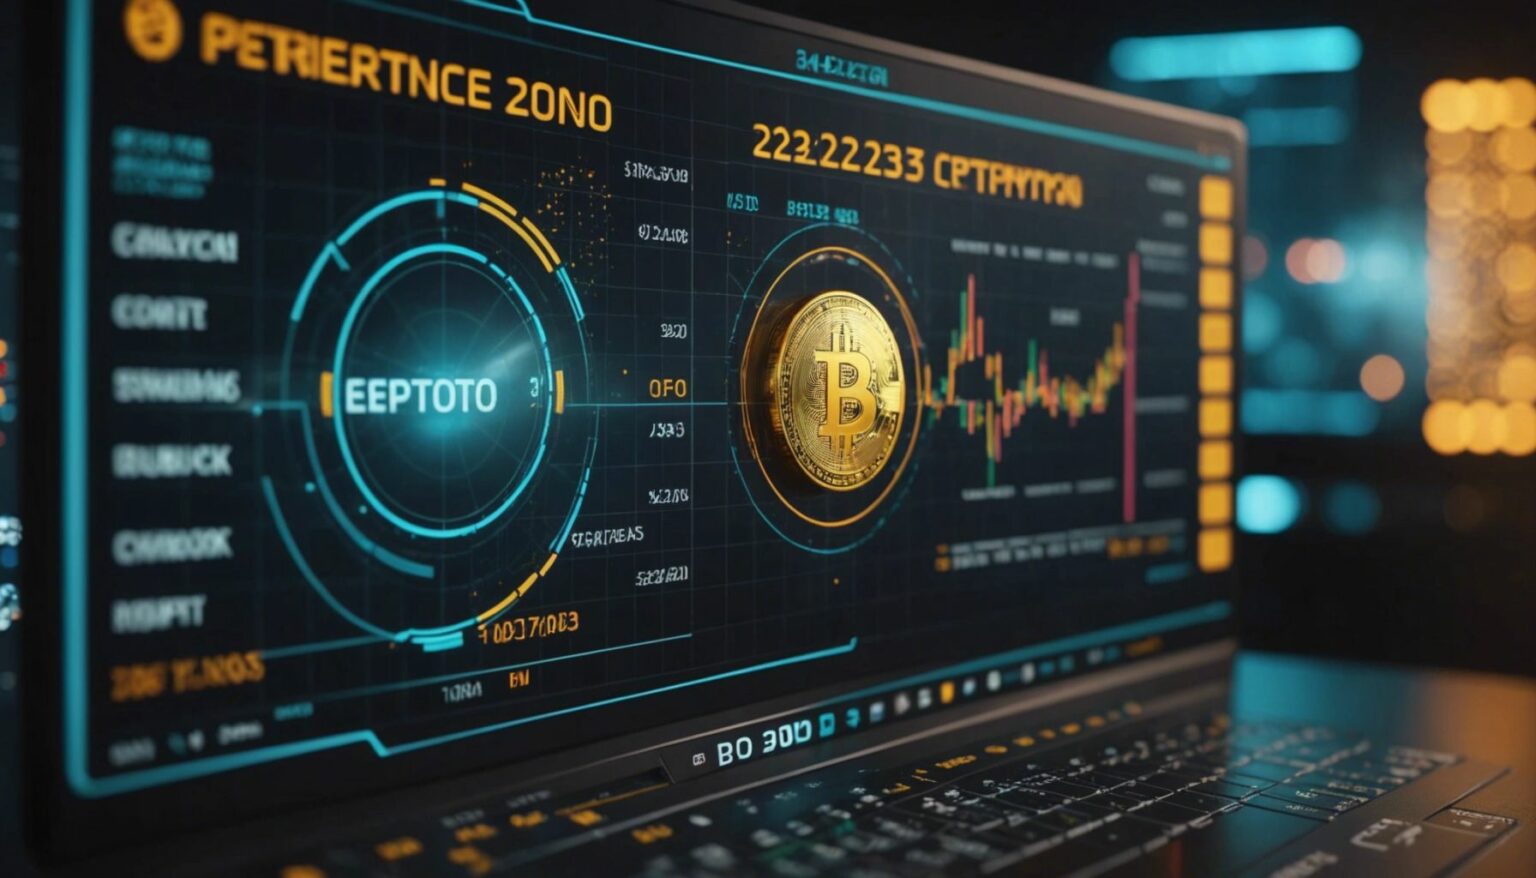 Futuristic chart with upward trends, crypto symbols, and 2023 calendar for top trading strategies.